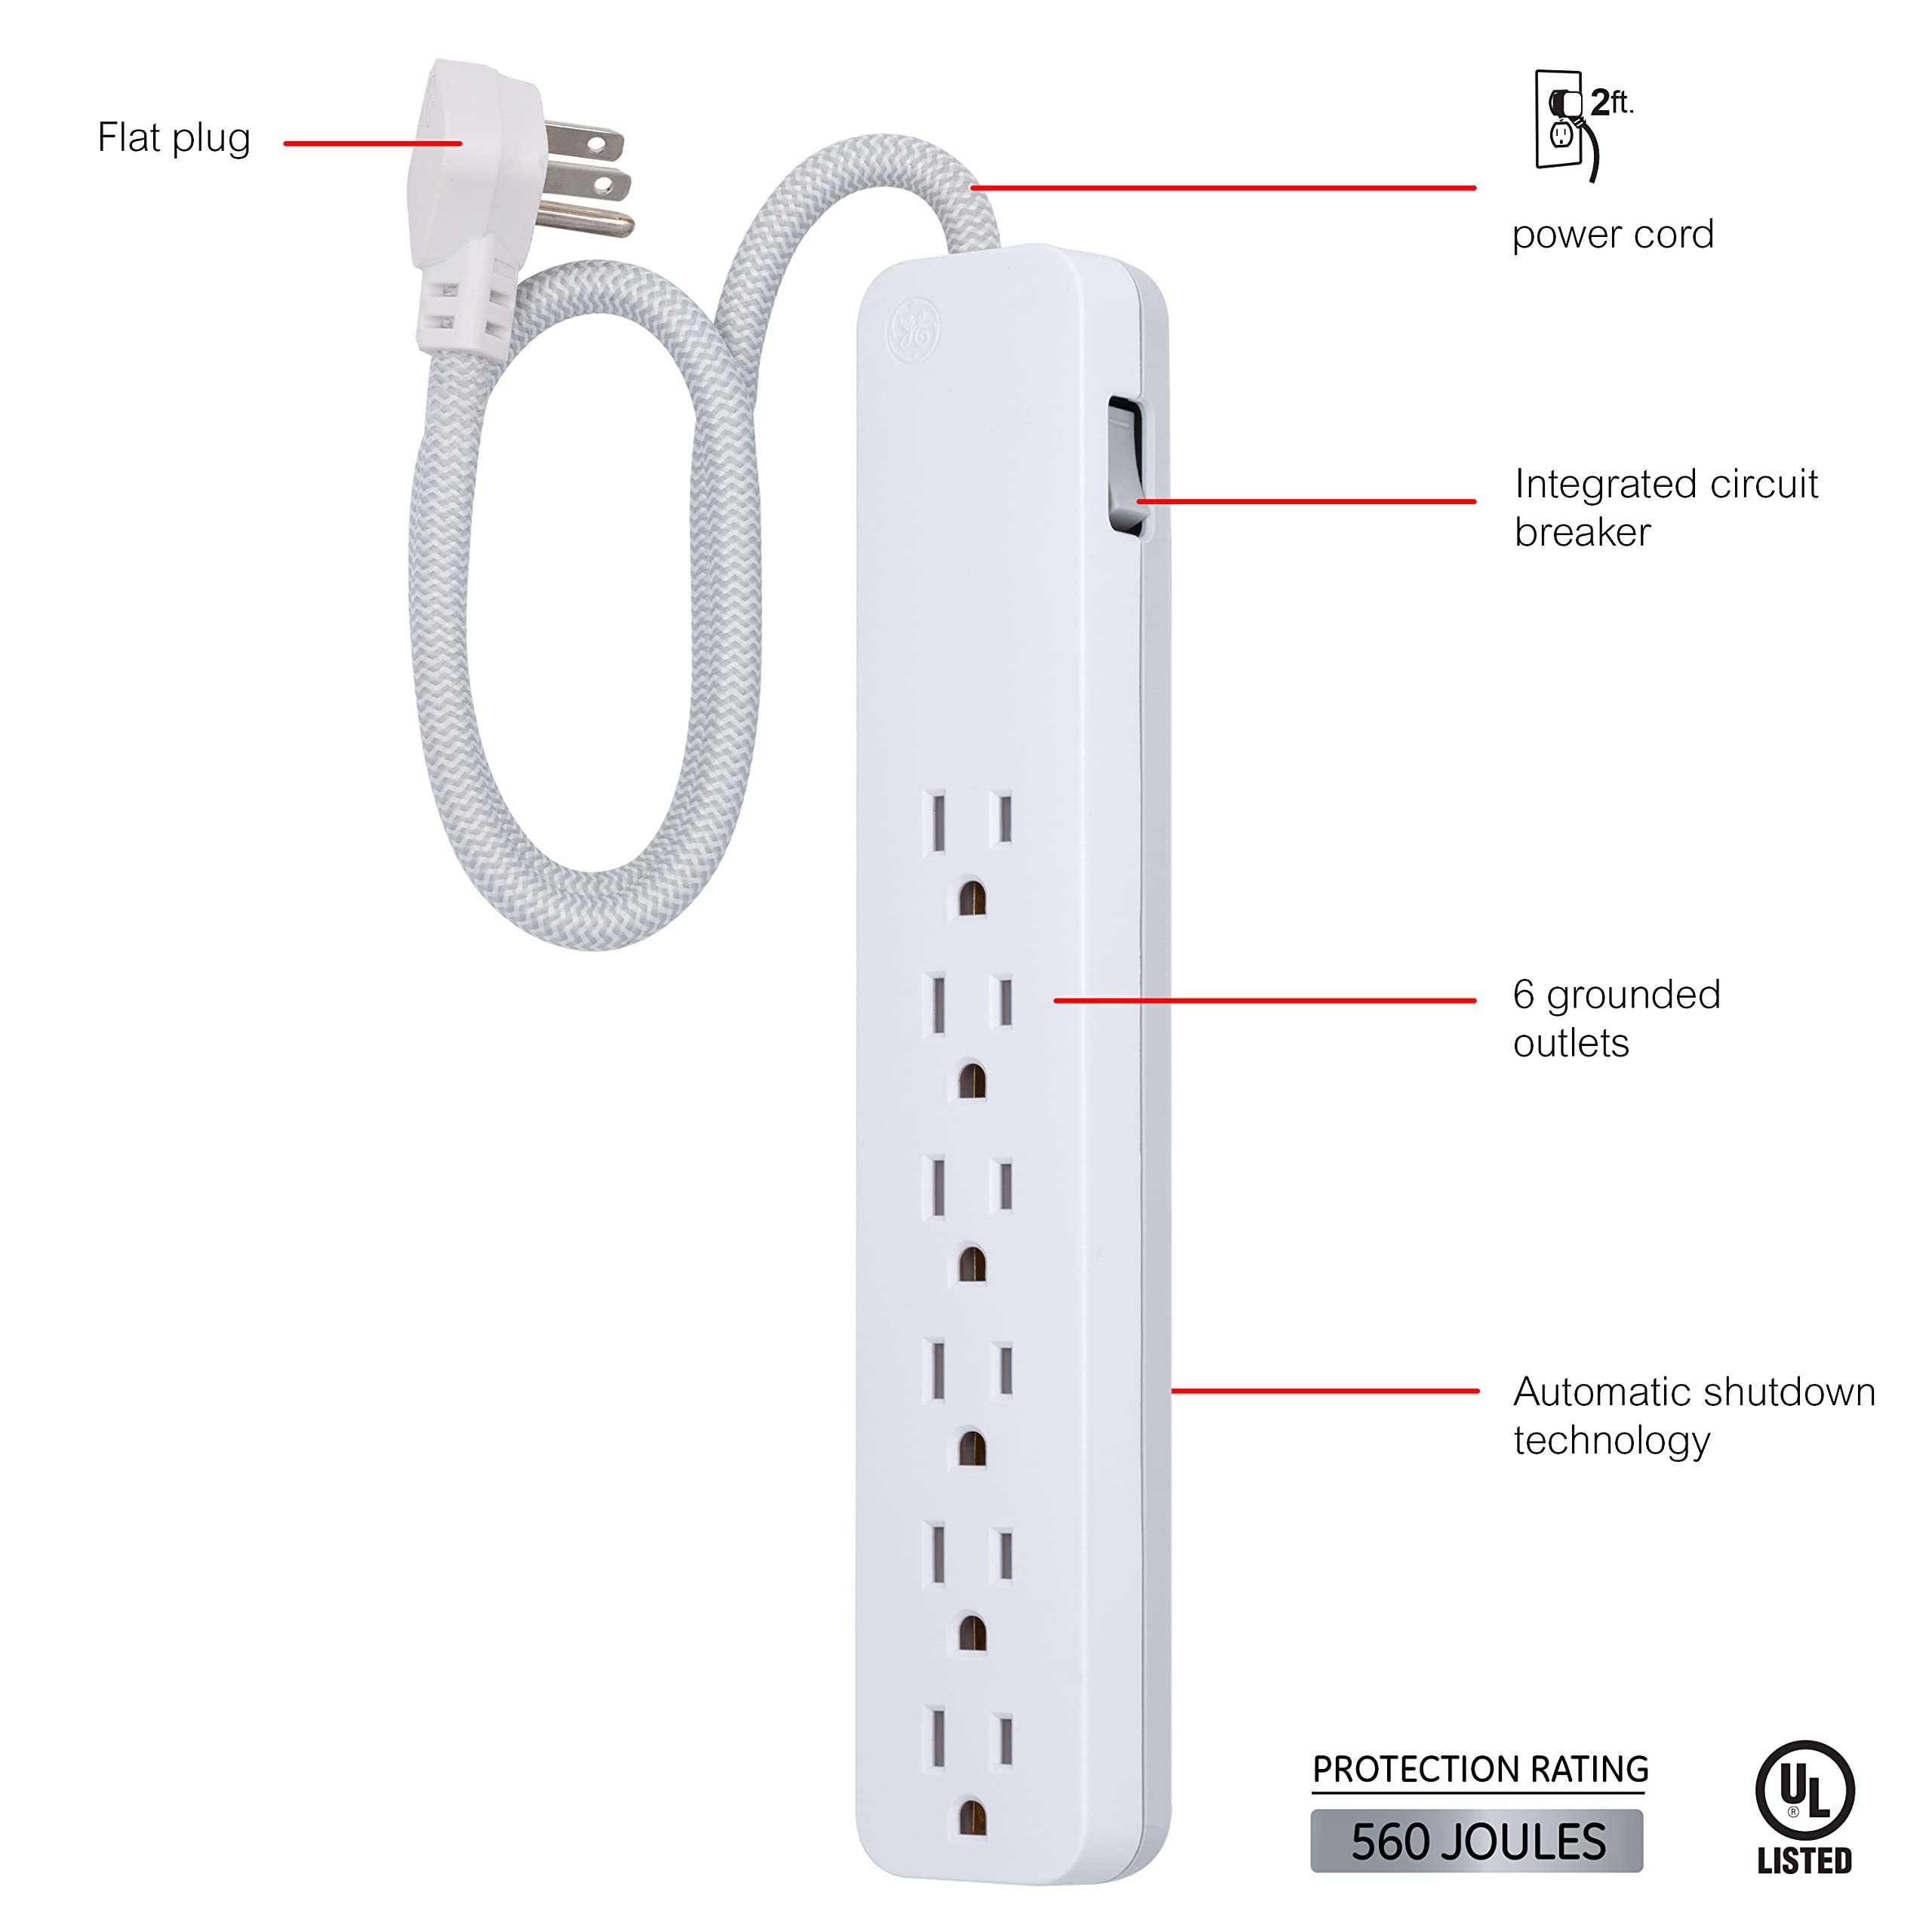 GE UltraPro 6-Outlet Surge Protector, 2 Ft Designer Braided Extension Cord, 560 Joules, Flat Plug, Wall Mount, UL Listed, White, 45264